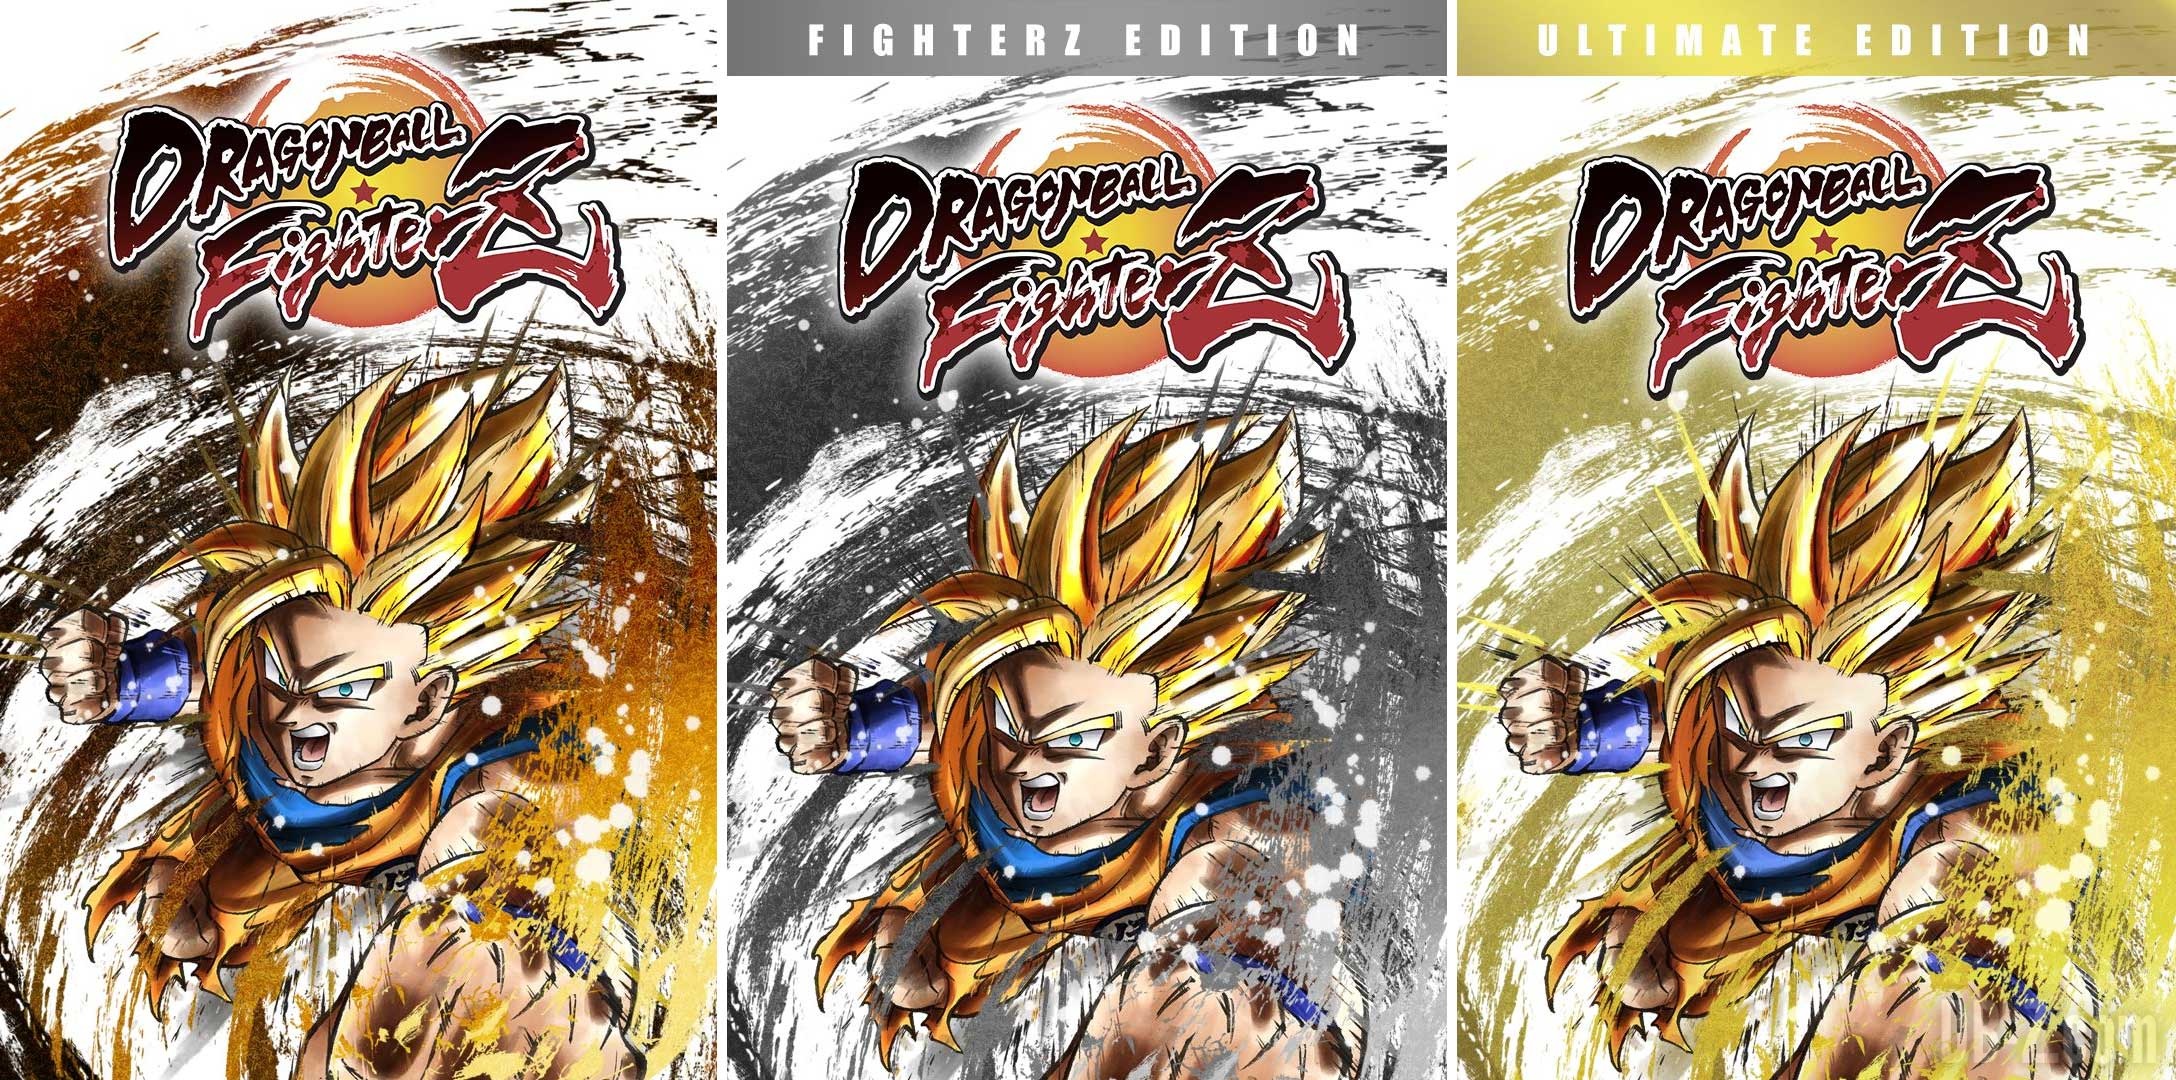 Dragon Ball FighterZ : Les quatre éditions Standard / FighterZ / Ultimate /  CollectorZ